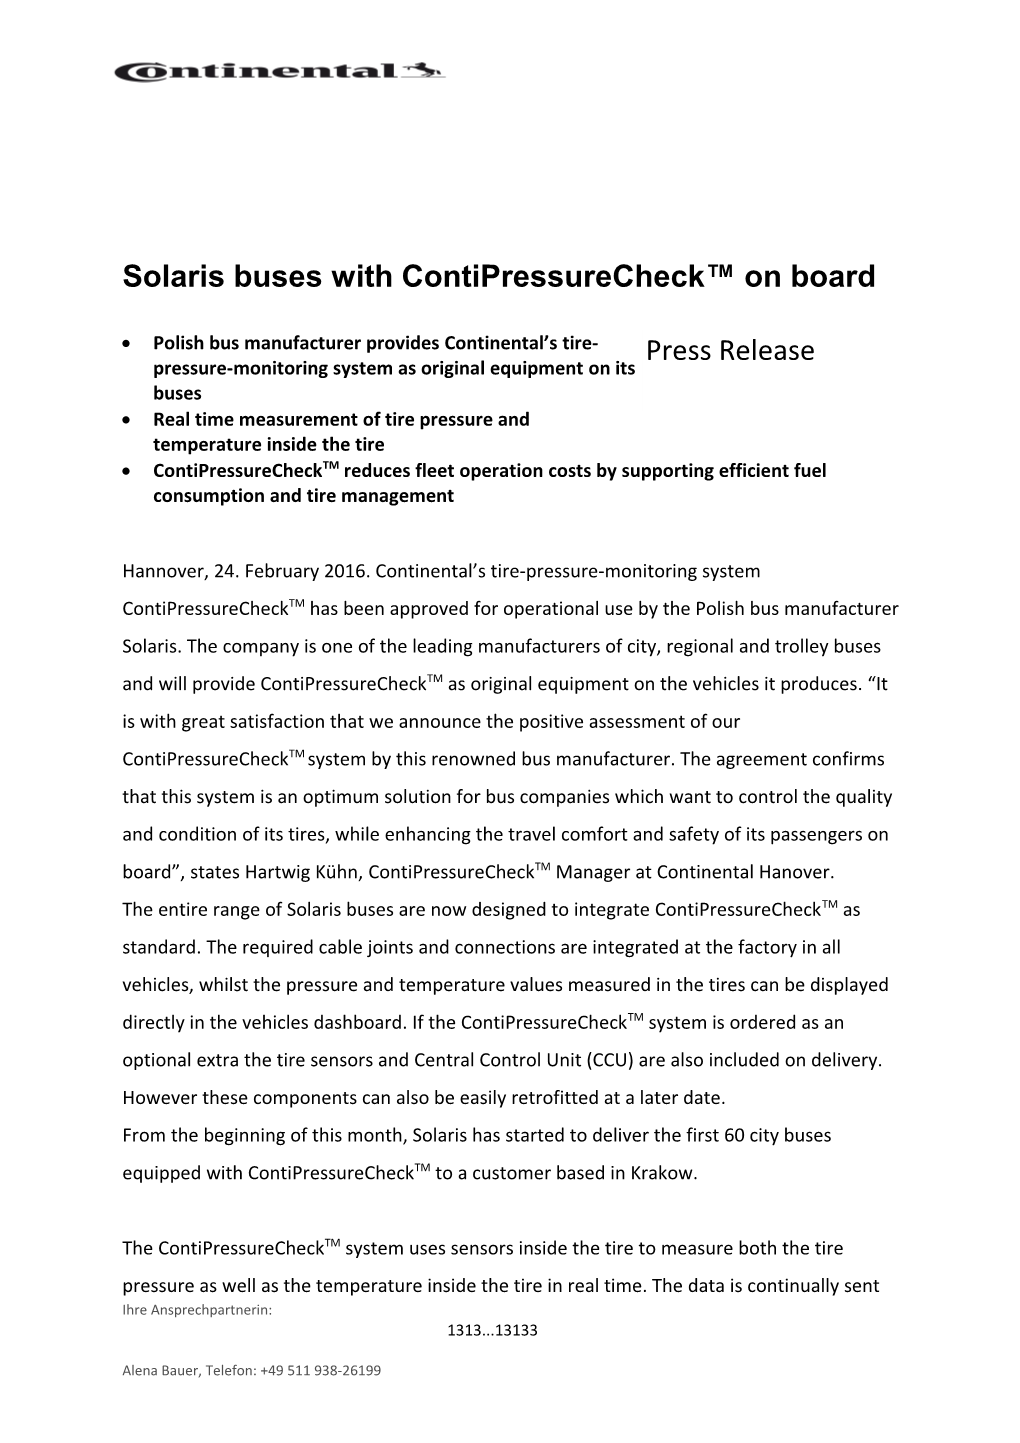 Solaris Buses with Contipressurecheck on Board